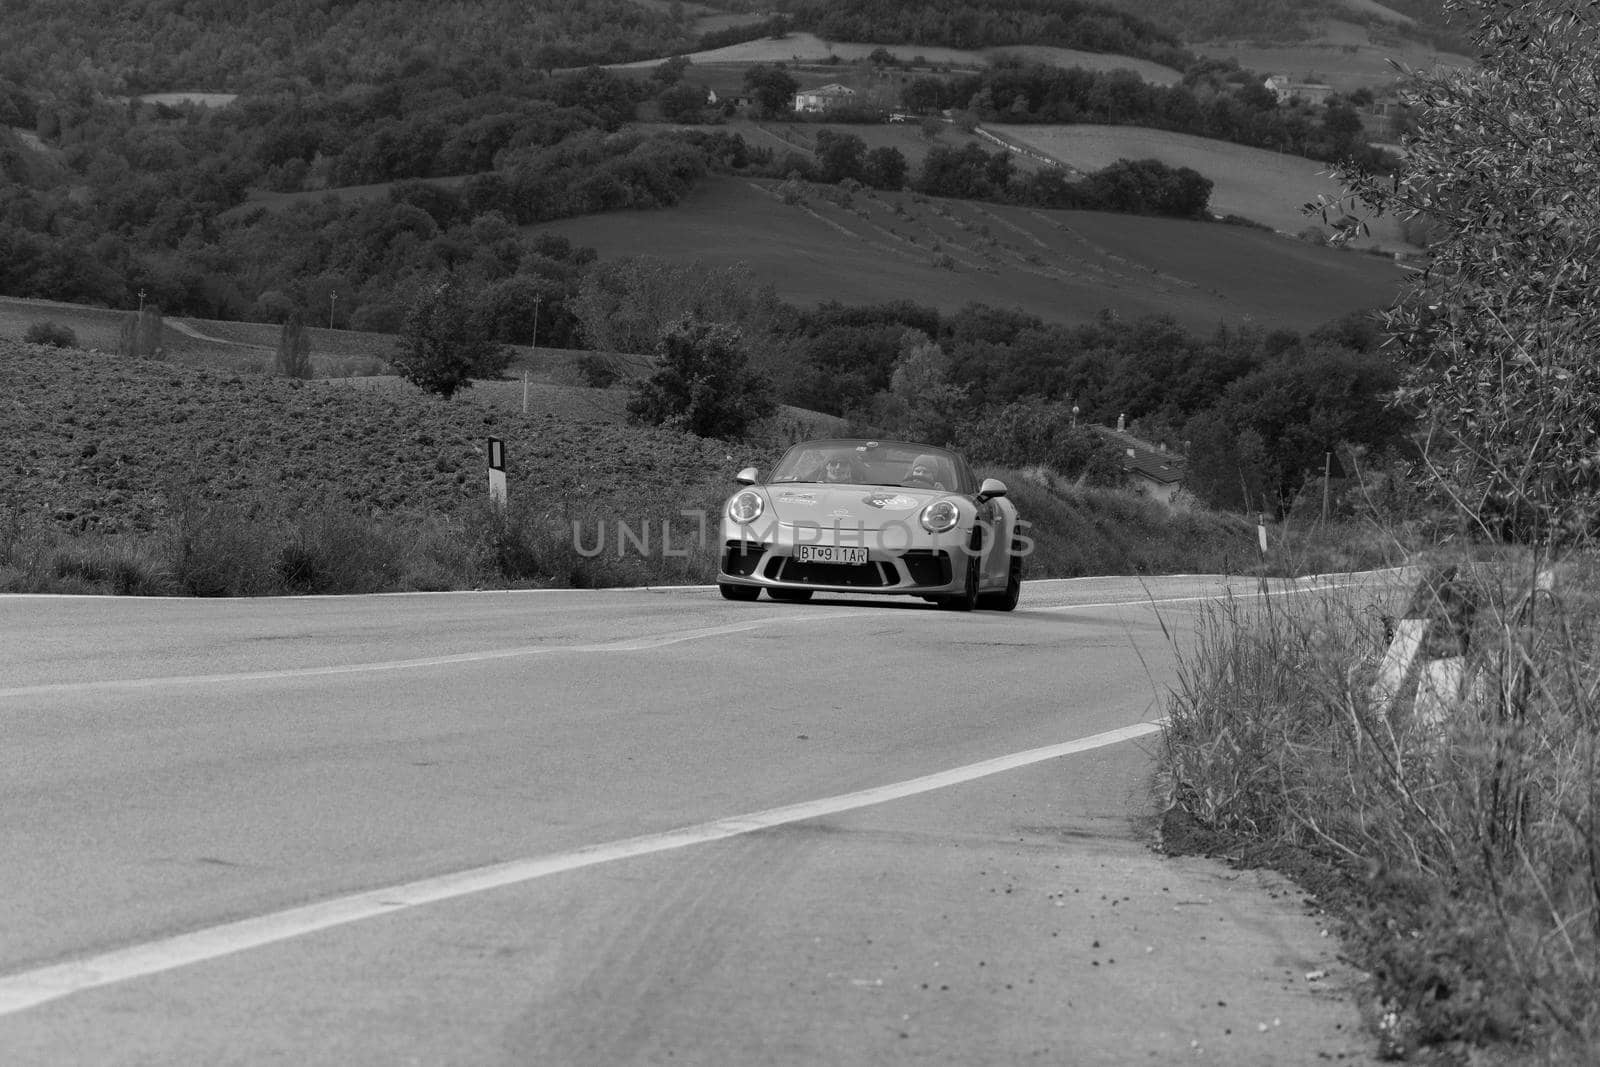 2020 : porsche 911 speedster on an old racing car in rally Mille Miglia 2020 the famous italian historical race (1927-1957